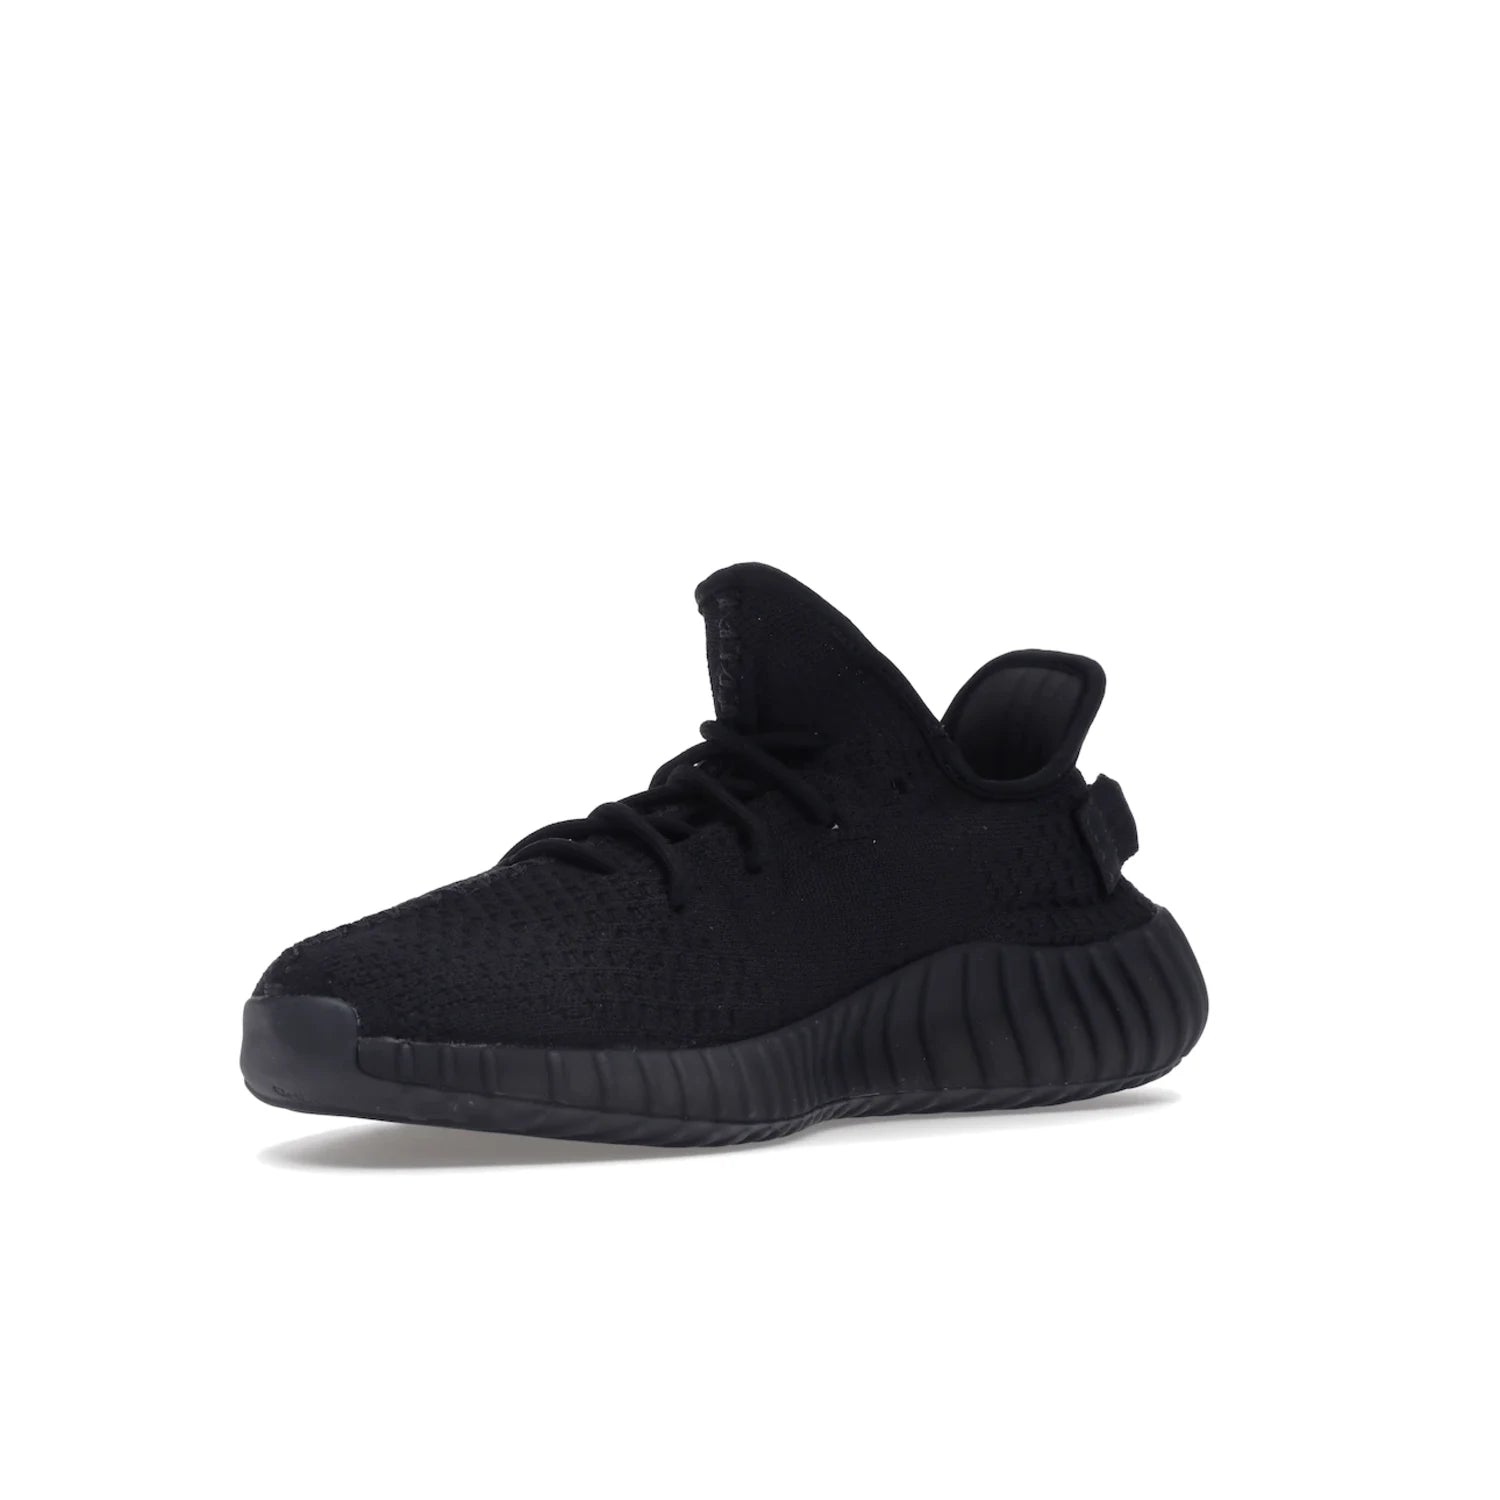 adidas Yeezy Boost 350 V2 Onyx - Image 15 - Only at www.BallersClubKickz.com - Adidas Yeezy Boost 350 V2 Onyx Triple Black shoes for comfort and style. Arriving Spring 2022.